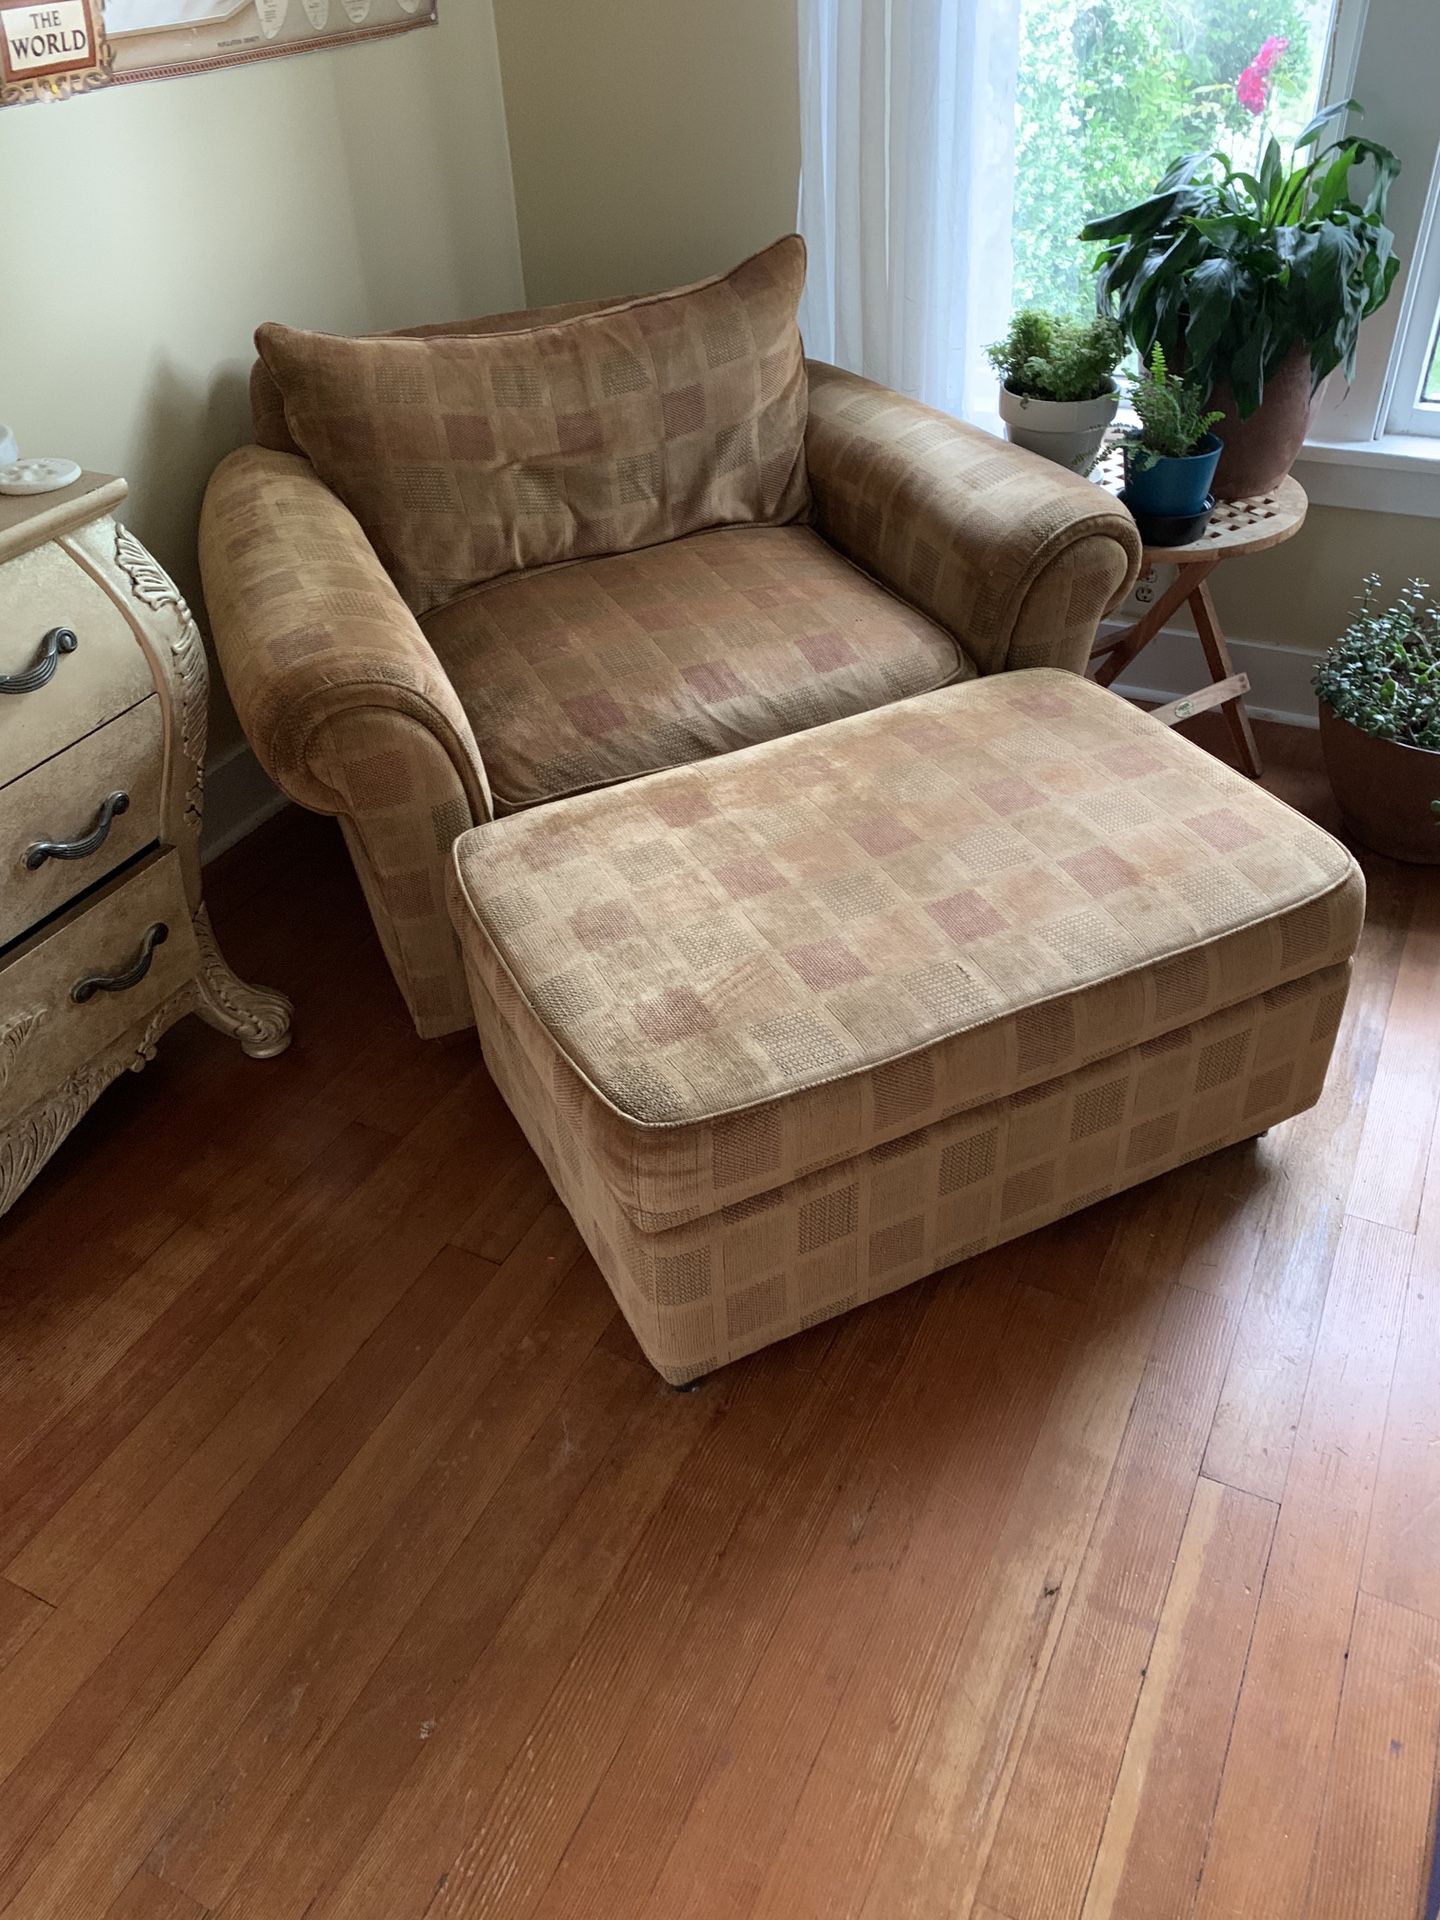 Gold armchair with storage ottoman